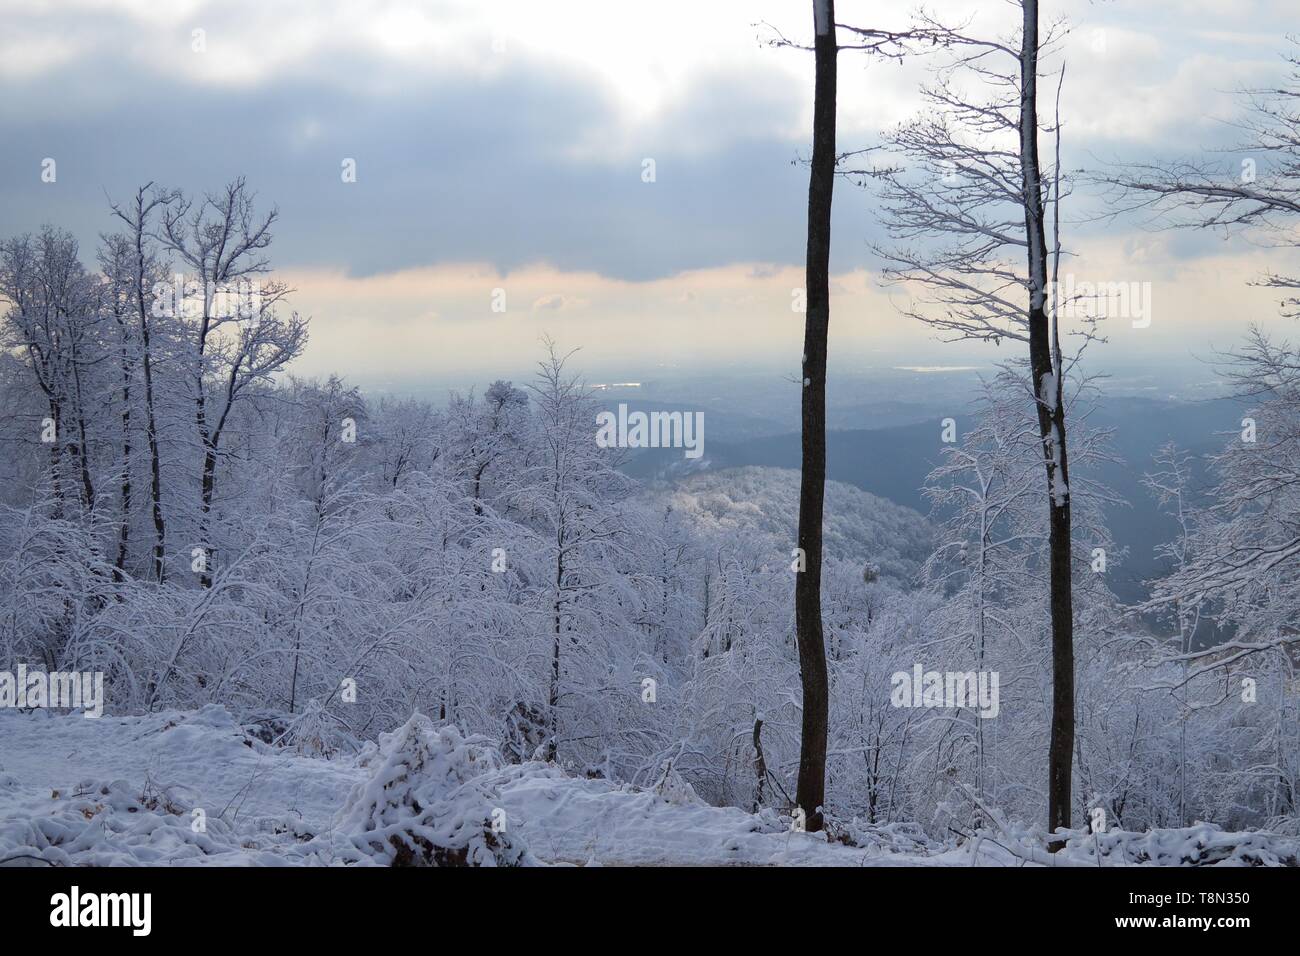 Winter landscape on Medvednica Mountain, trees under snow Stock Photo